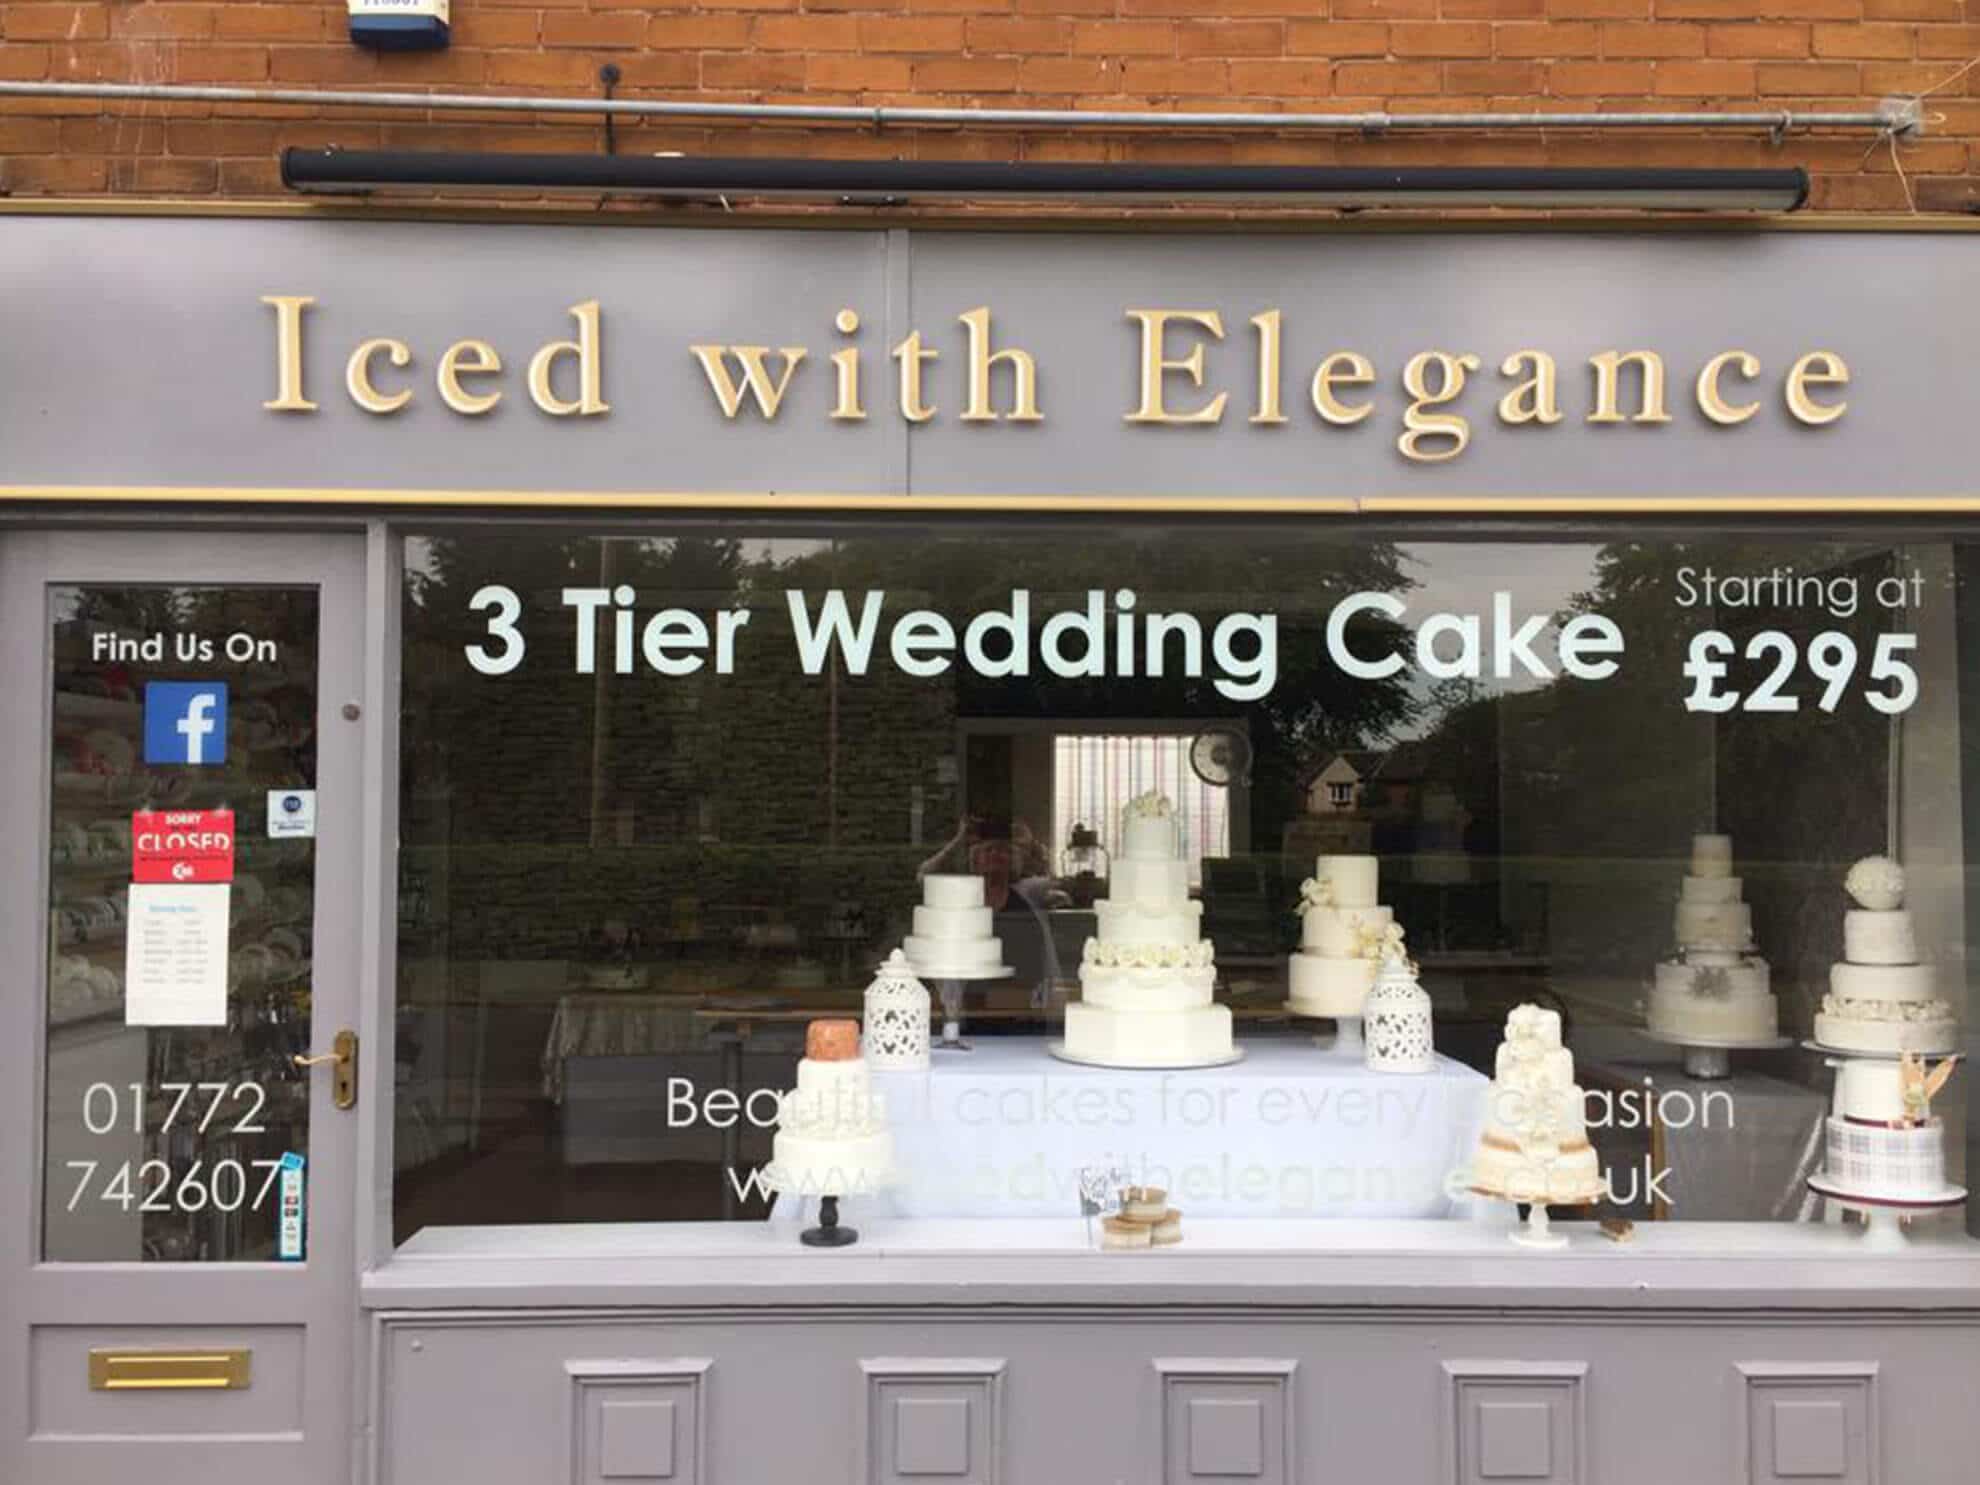 Iced with Elegance sign